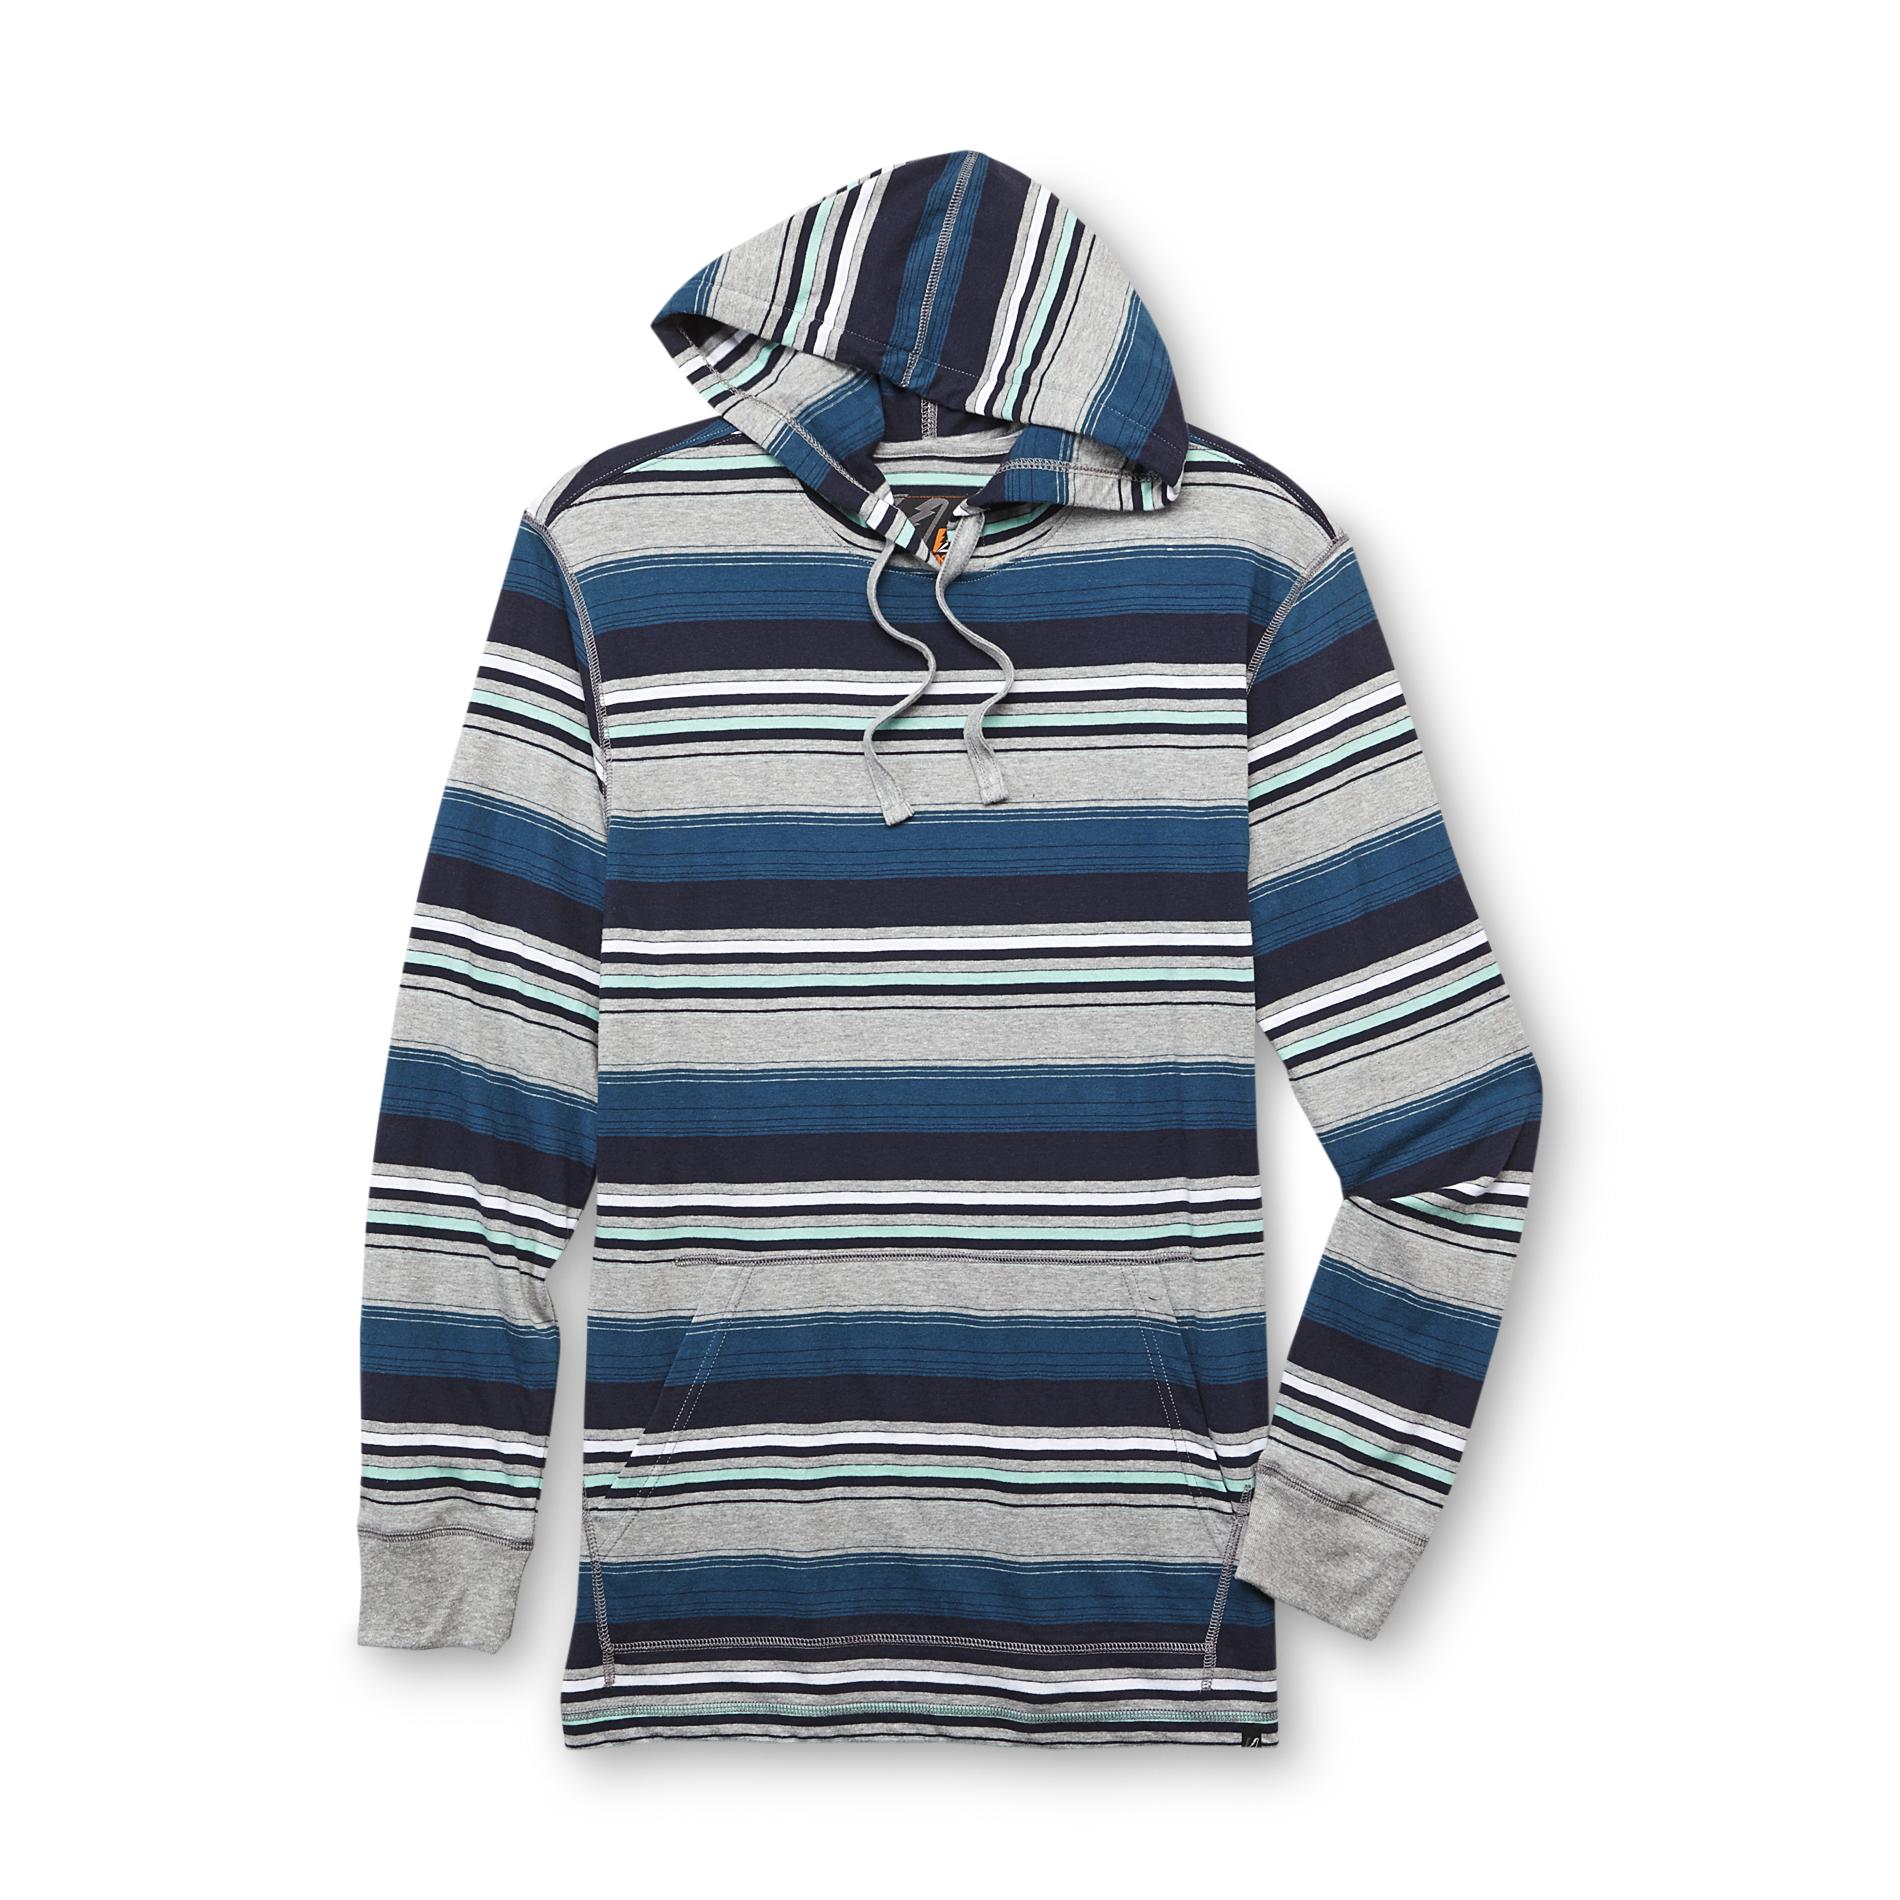 Amplify Young Men's Hoodie Shirt - Striped